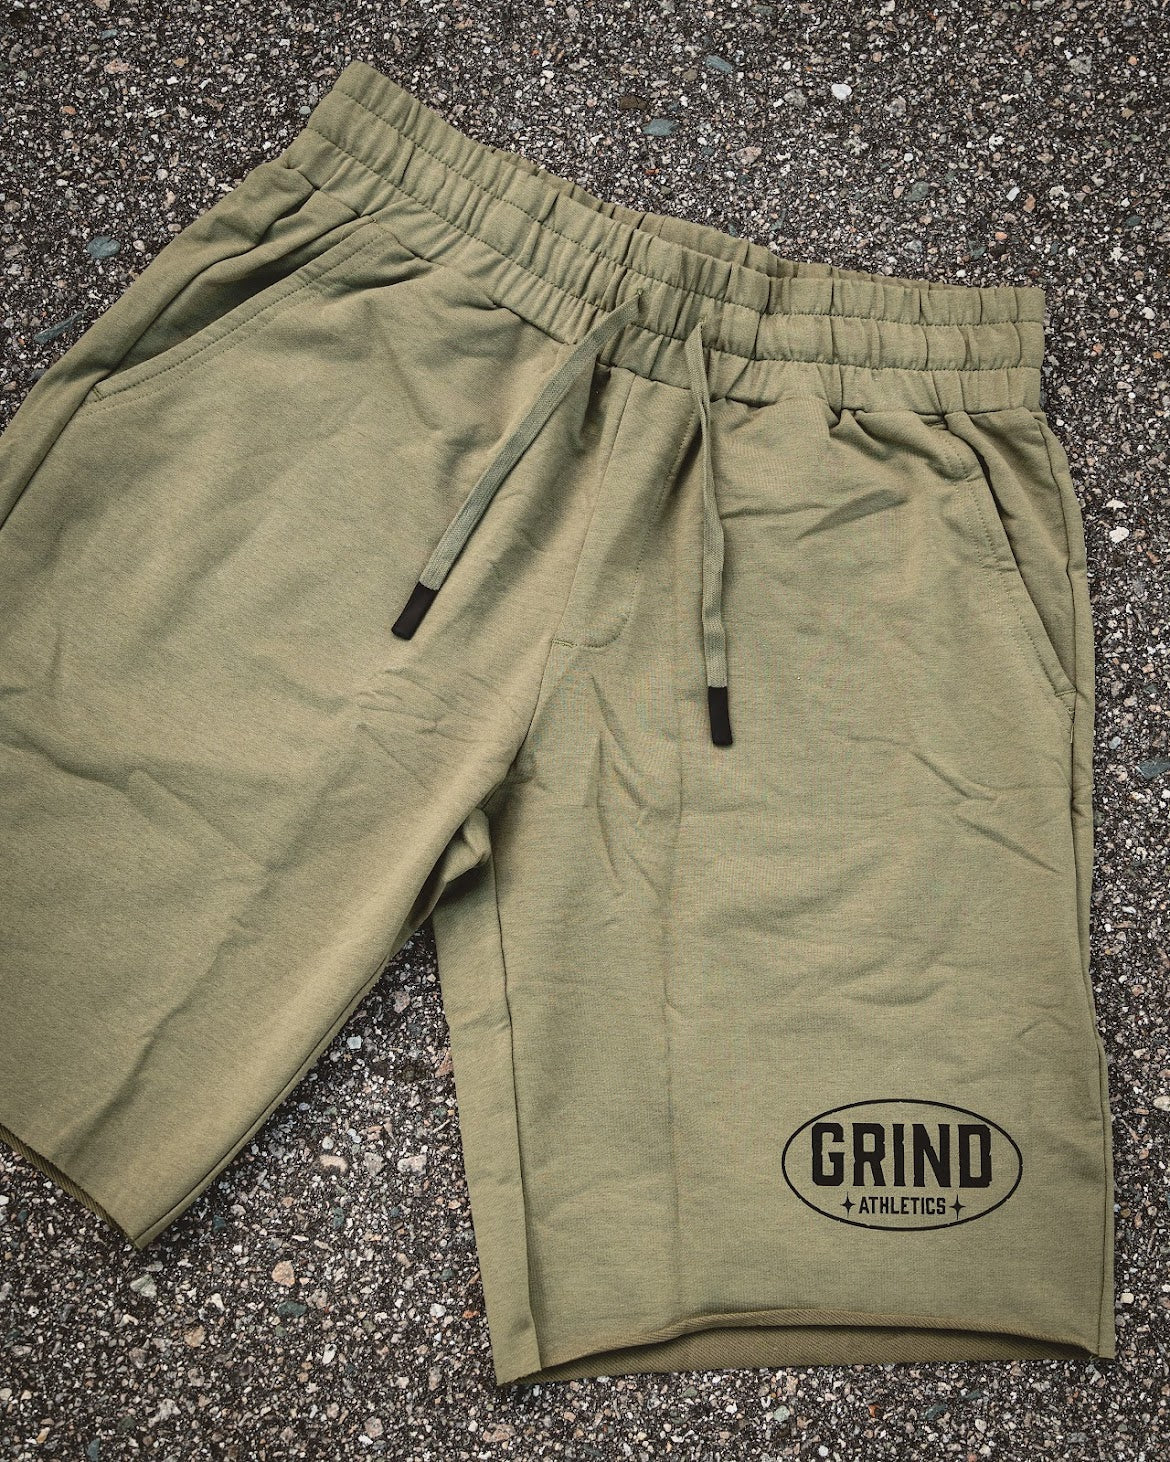 Classic Grind Shorts - Oval Green Logo OD 